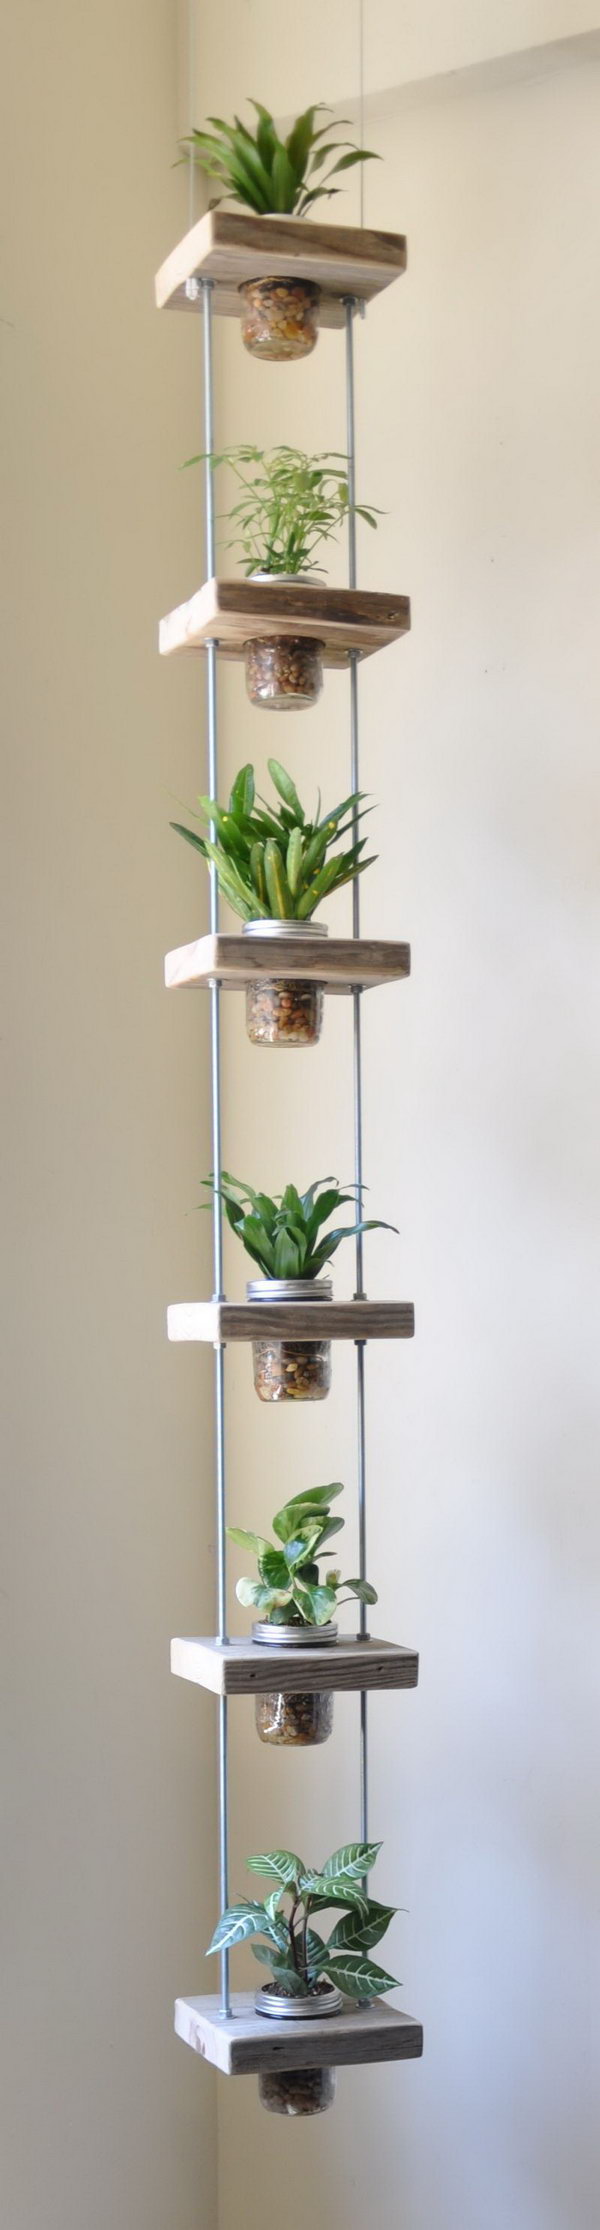 Vertical herb garden made of salvaged wood and mason jars.